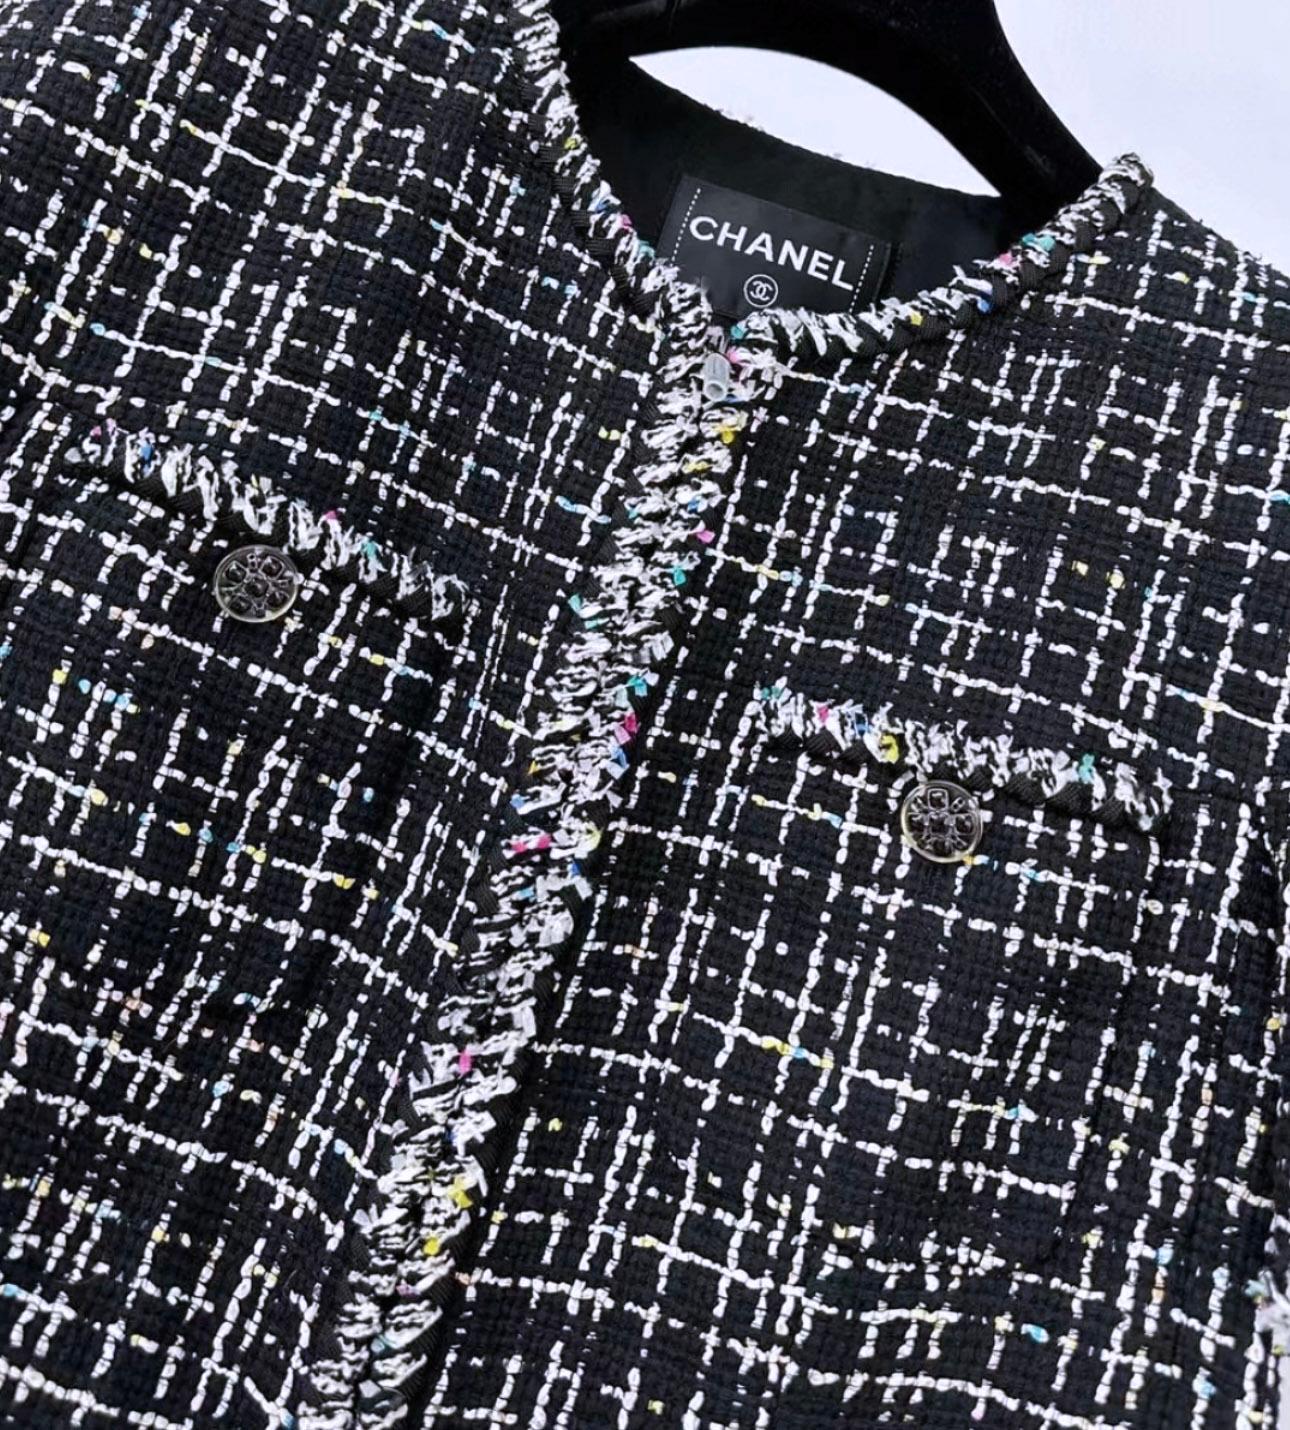 Chanel Iconic 2019 Spring Black Tweed Jacket  For Sale 5